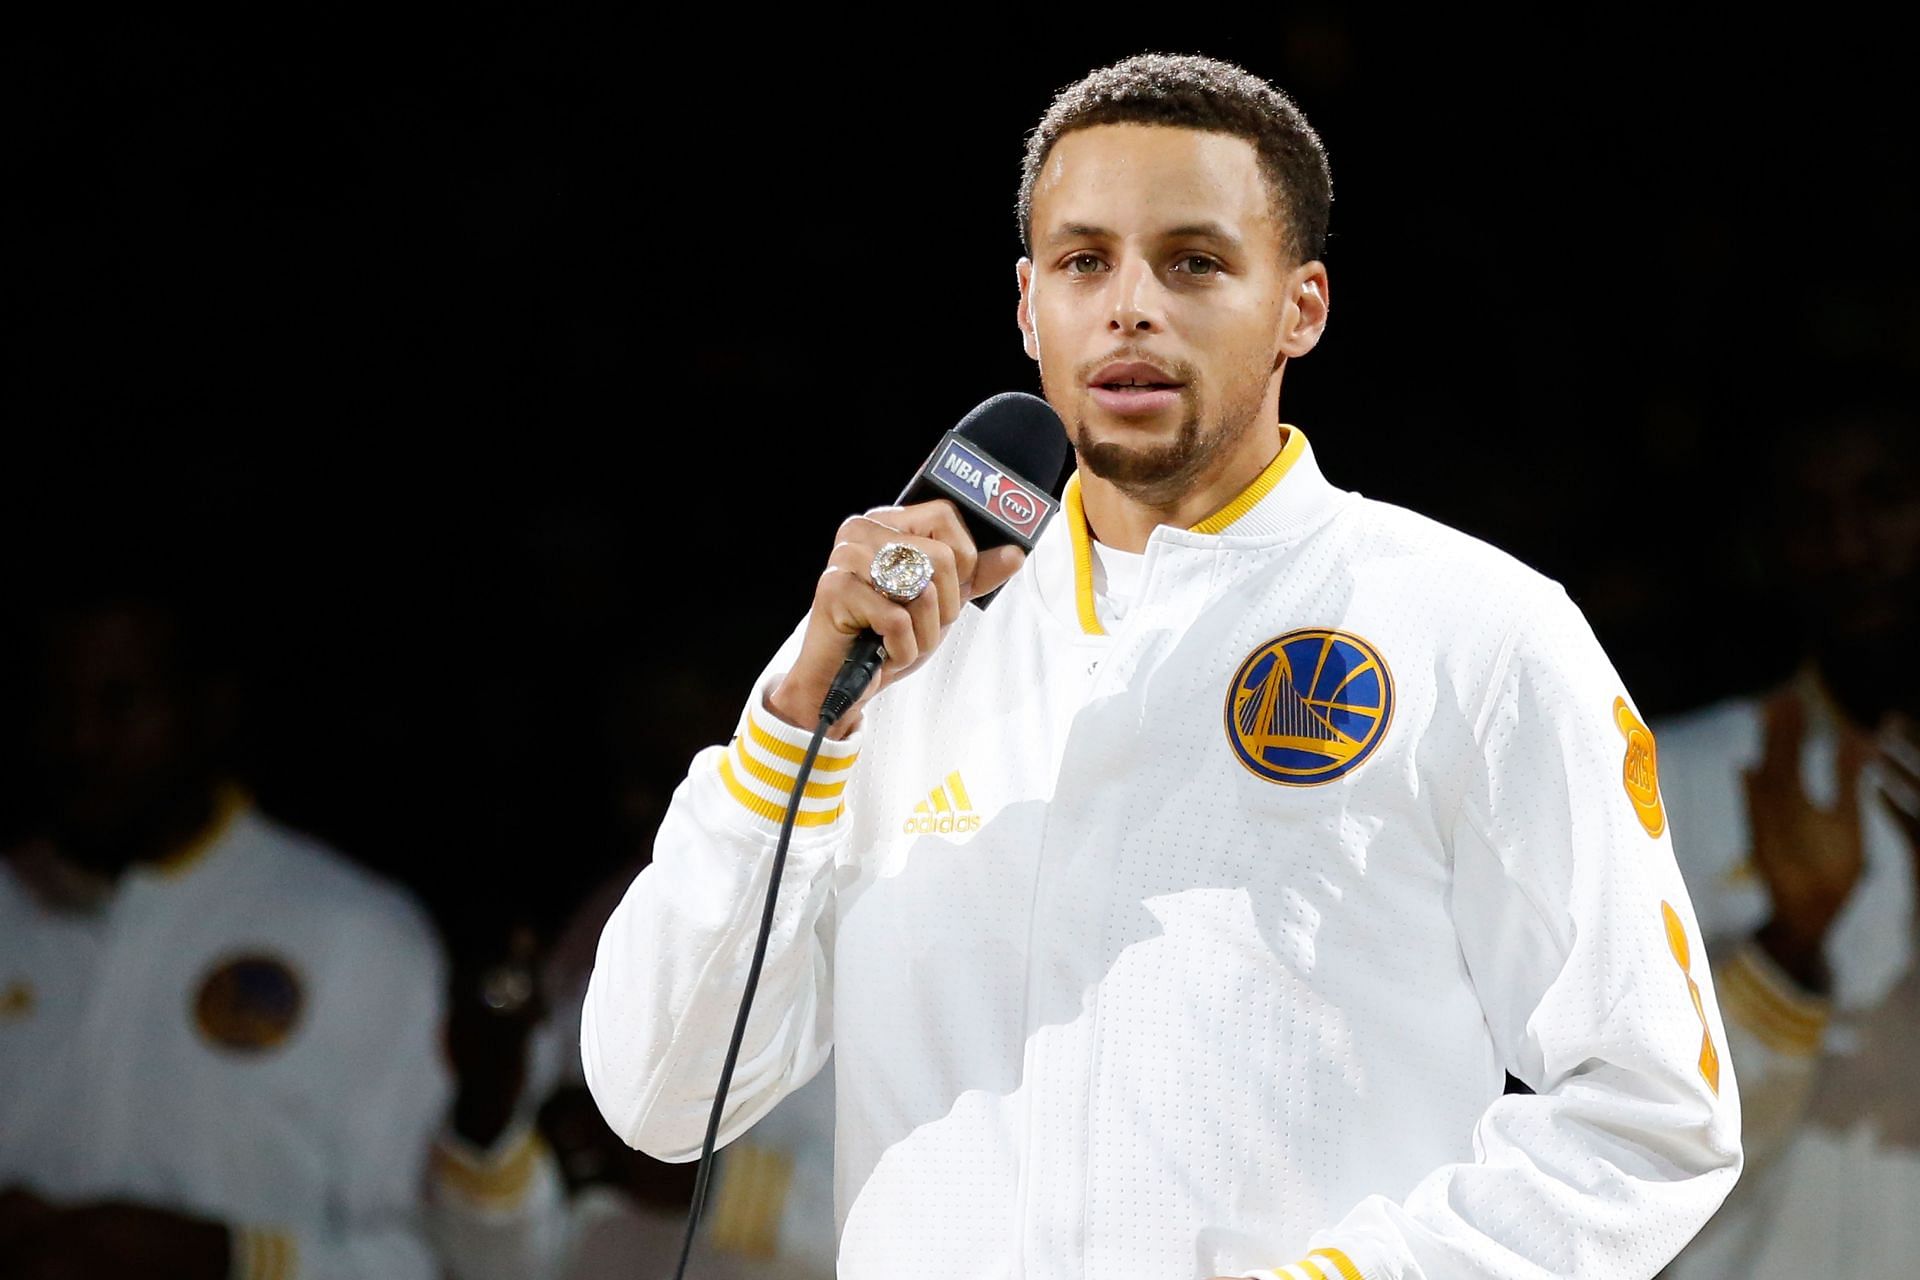 Stephen Curry of the Golden State Warriors at the 2015 ring ceremony